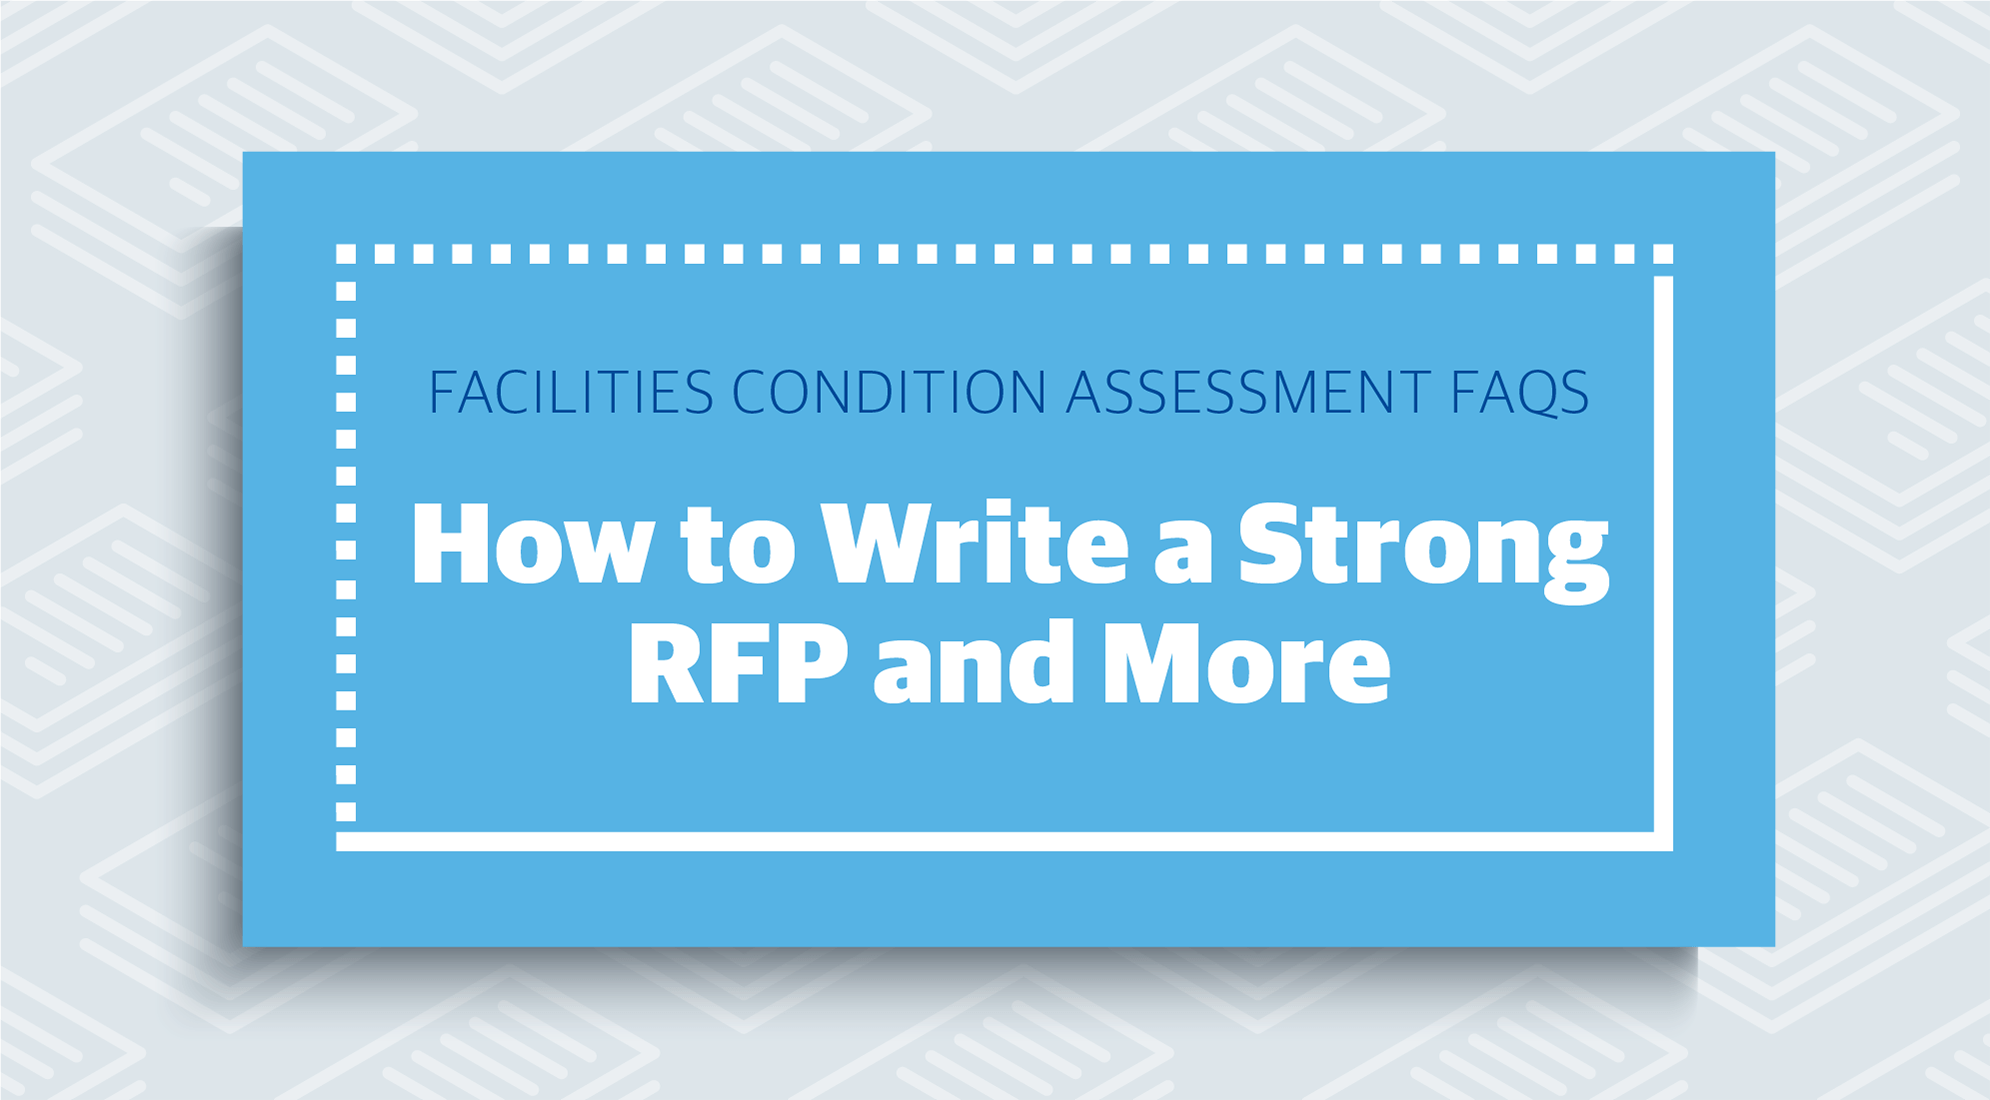 Facilities Condition Assessment FAQs: How to Write a Strong RFP and More